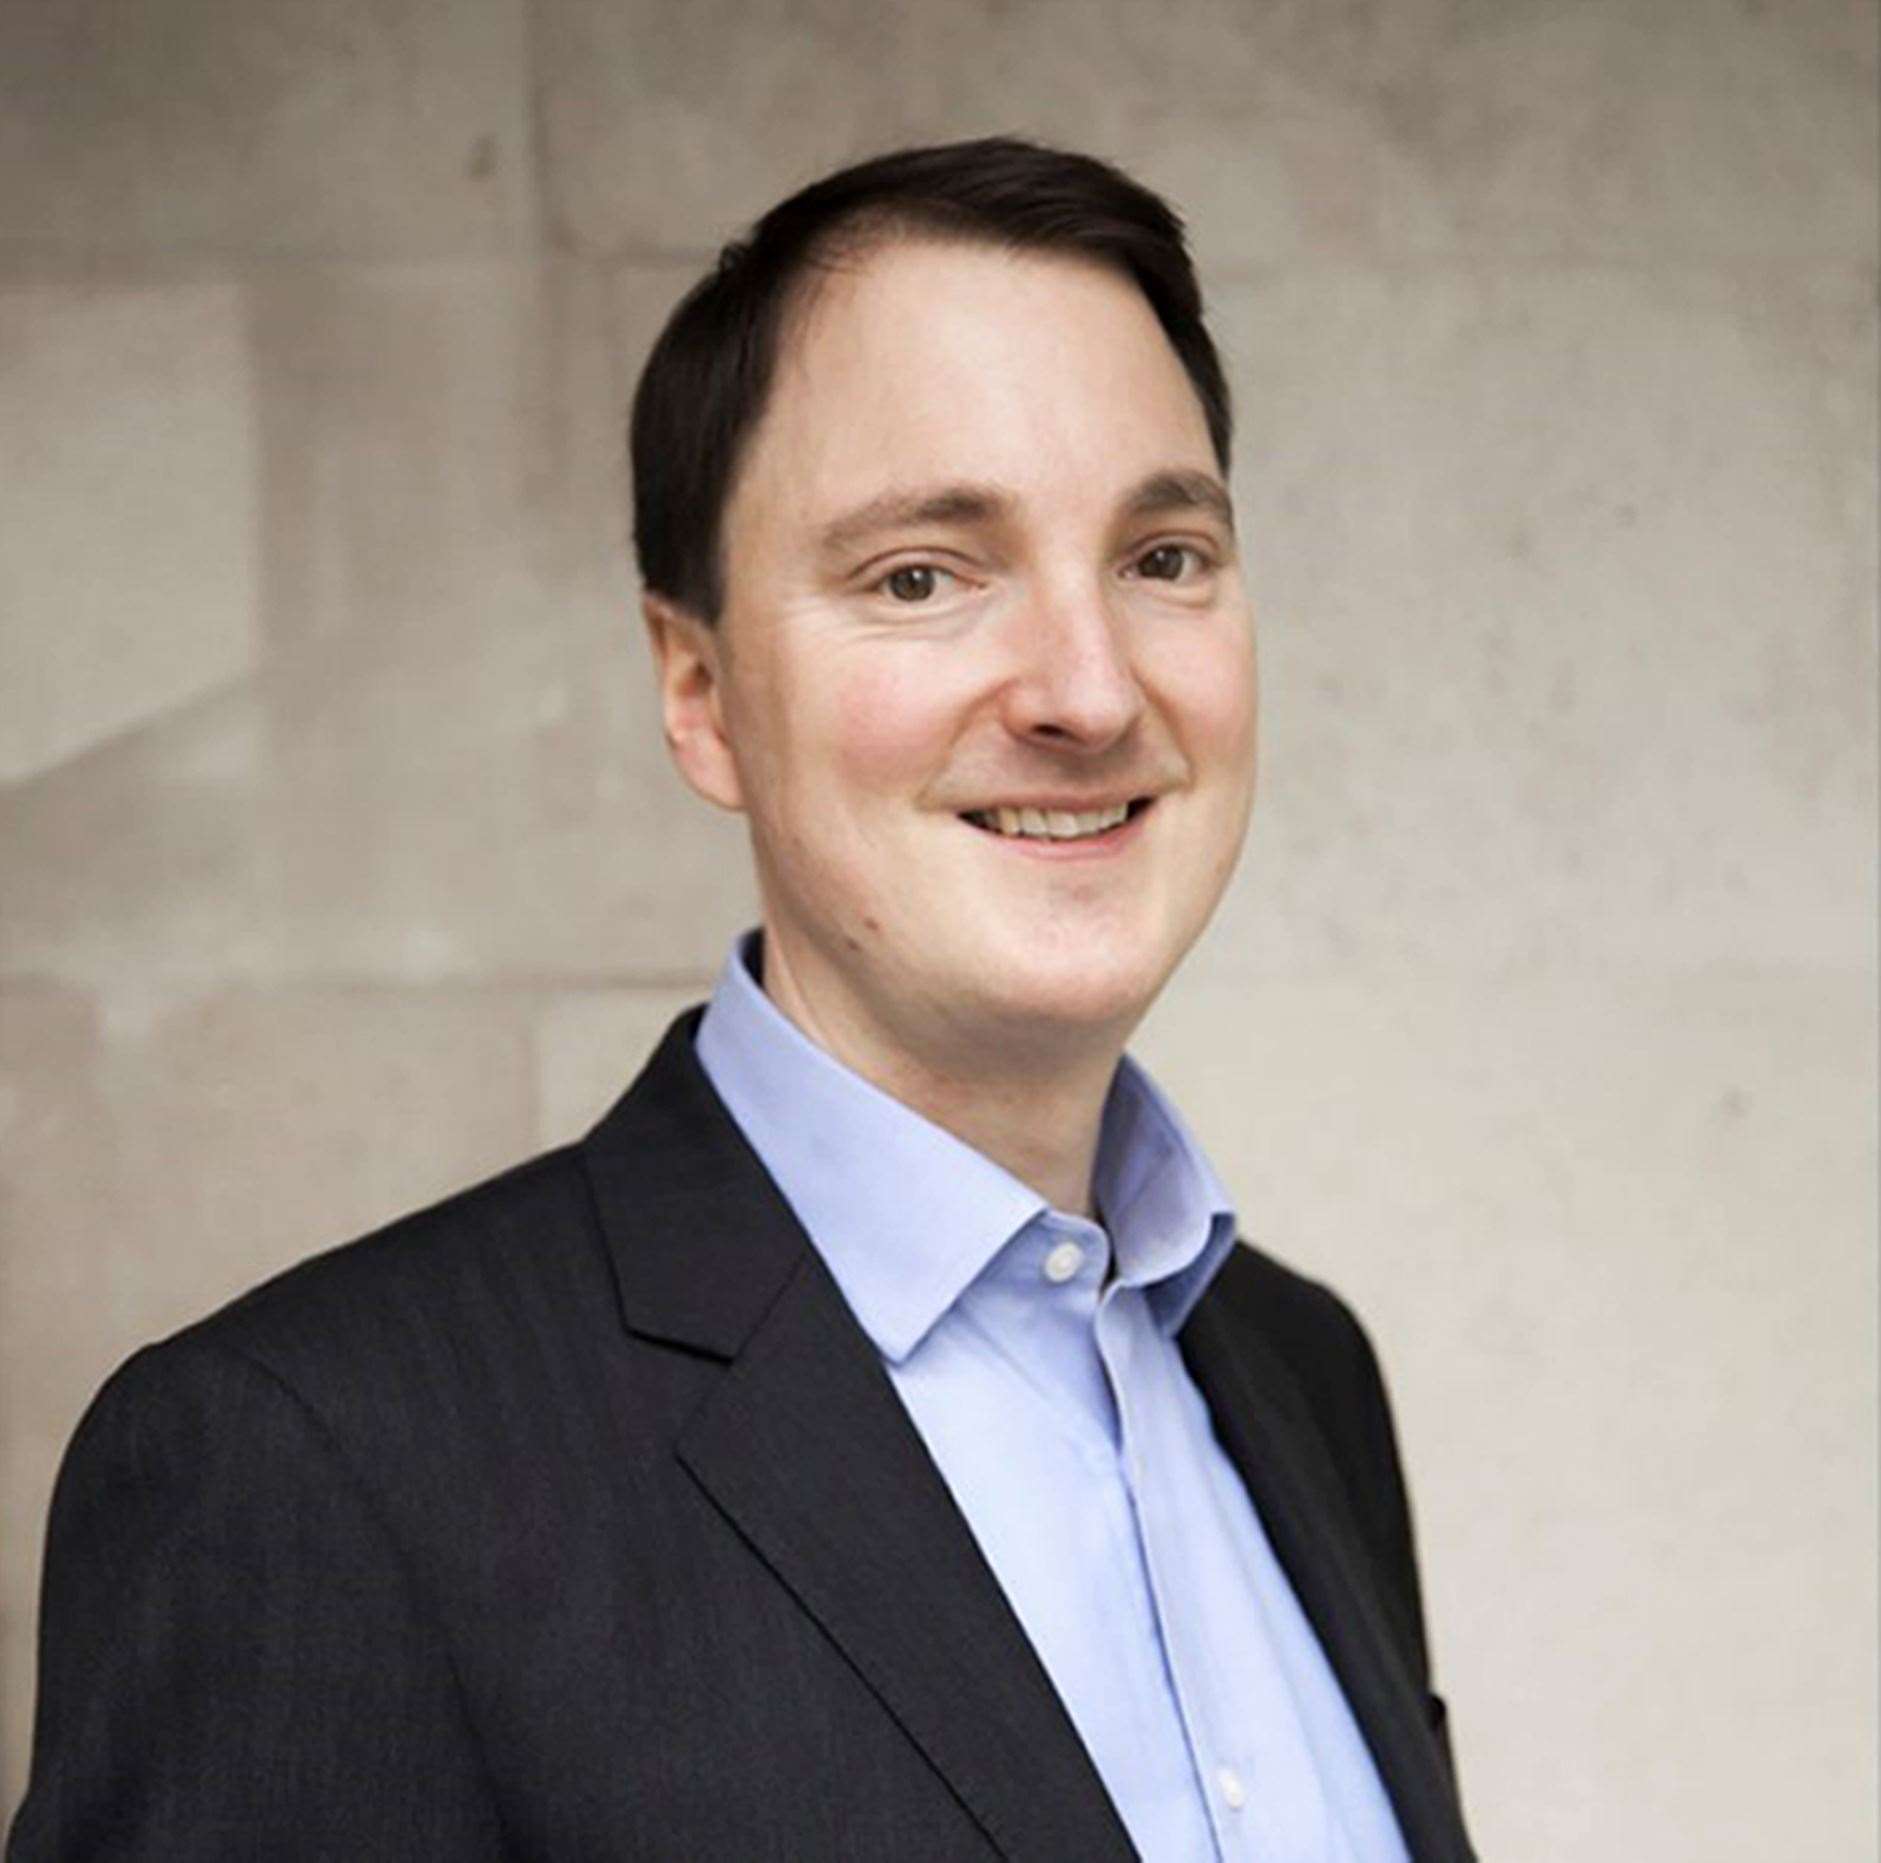 The Royal Philharmonic Orchestra’s managing director James Williams (RPO/PA)